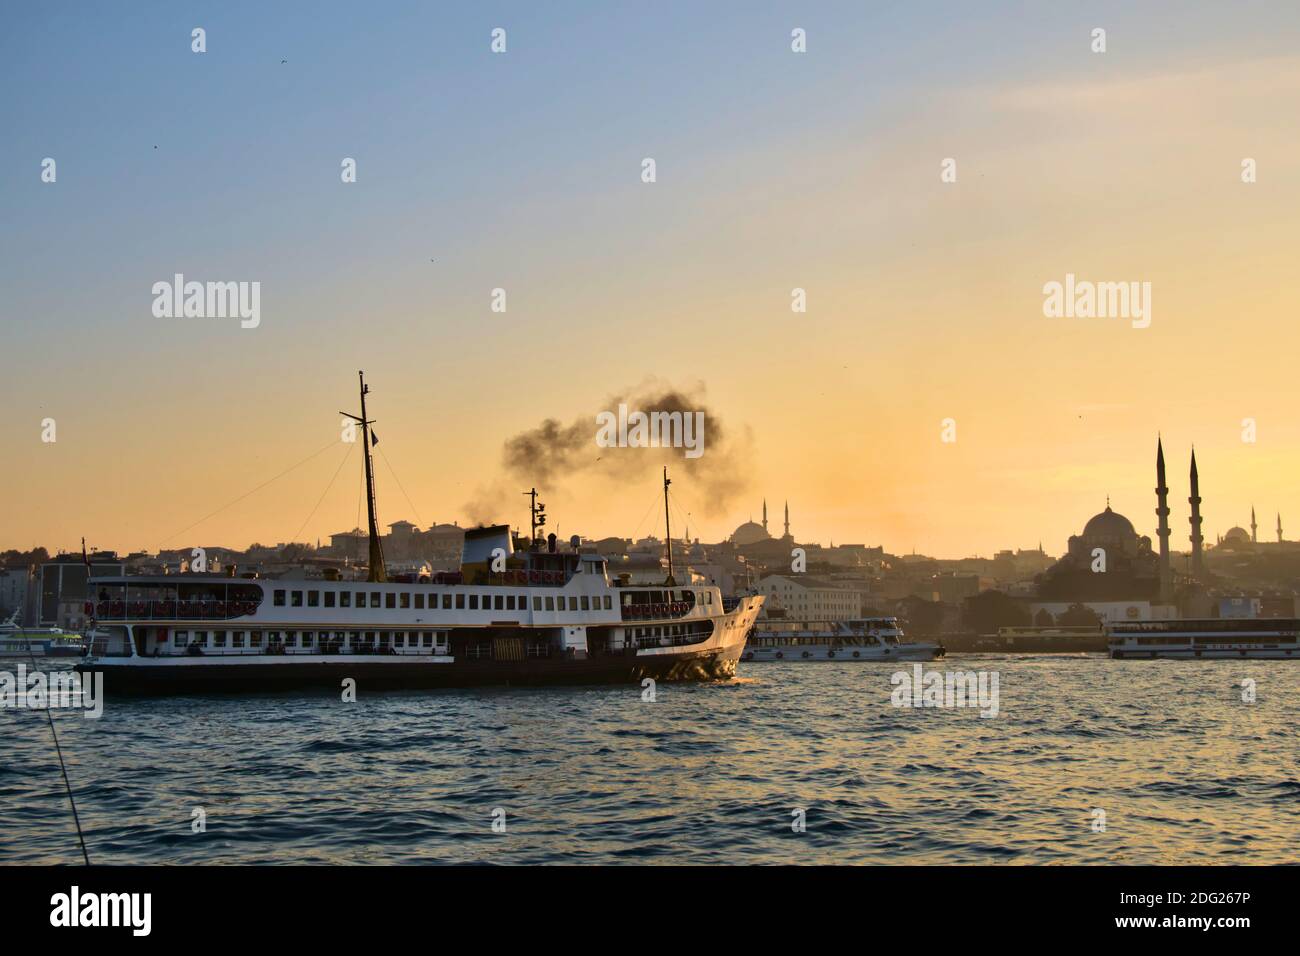 Historical passengers steamer and sunset view of Istanbul city. Stock Photo